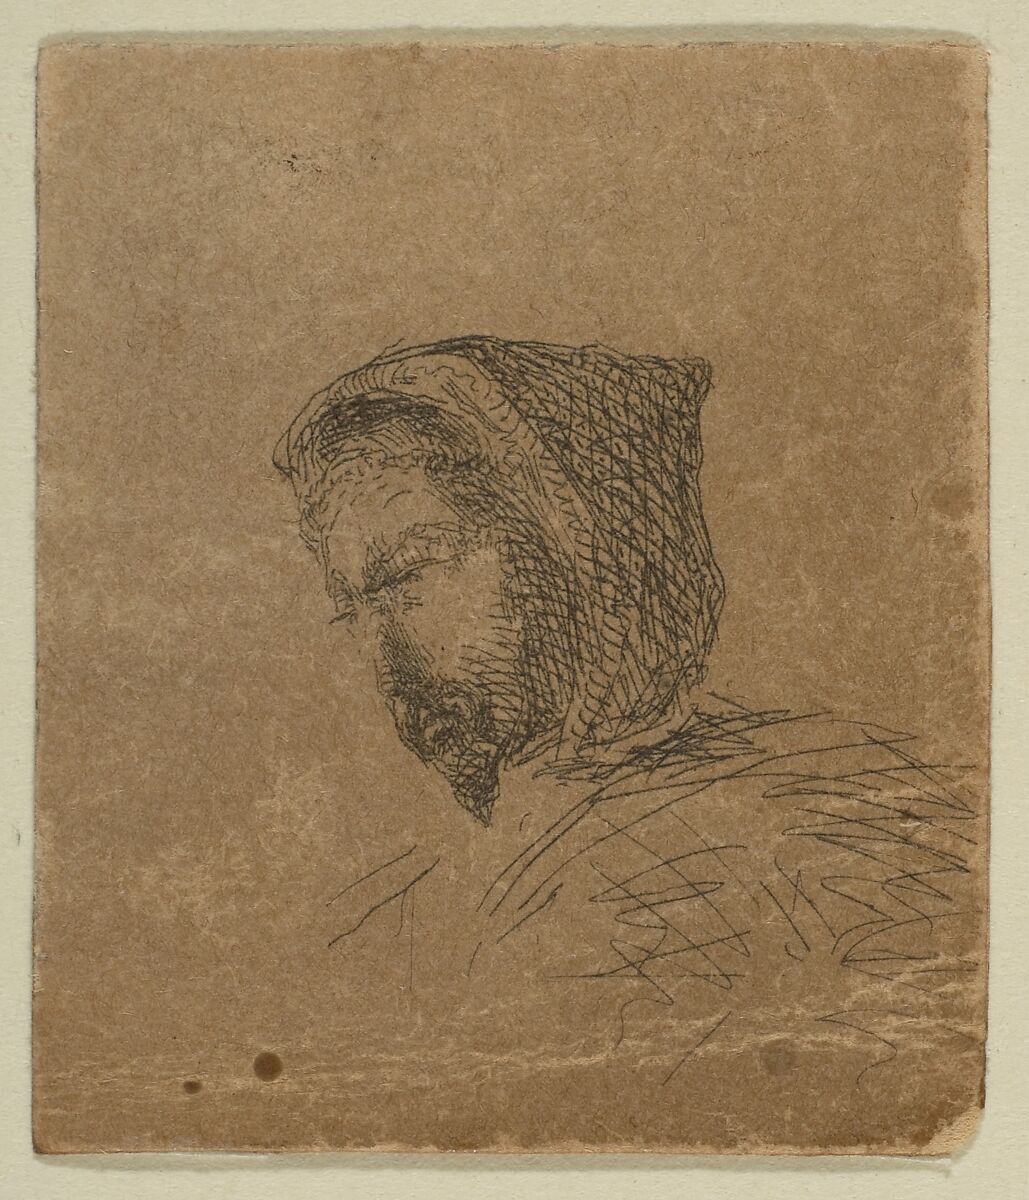 Hooded Male Head (from Sketches on the Coast Survey Plate), James McNeill Whistler (American, Lowell, Massachusetts 1834–1903 London), Etching; proof impression of the only state (Glasgow 1); this is a fragment cut from the upper portion of "Sketches on the Coast Survey Plate" (Kennedy no. 1) by Whistler and mounted on a board with six other related fragments. Cited by Glasgow as the earliest known impression. 